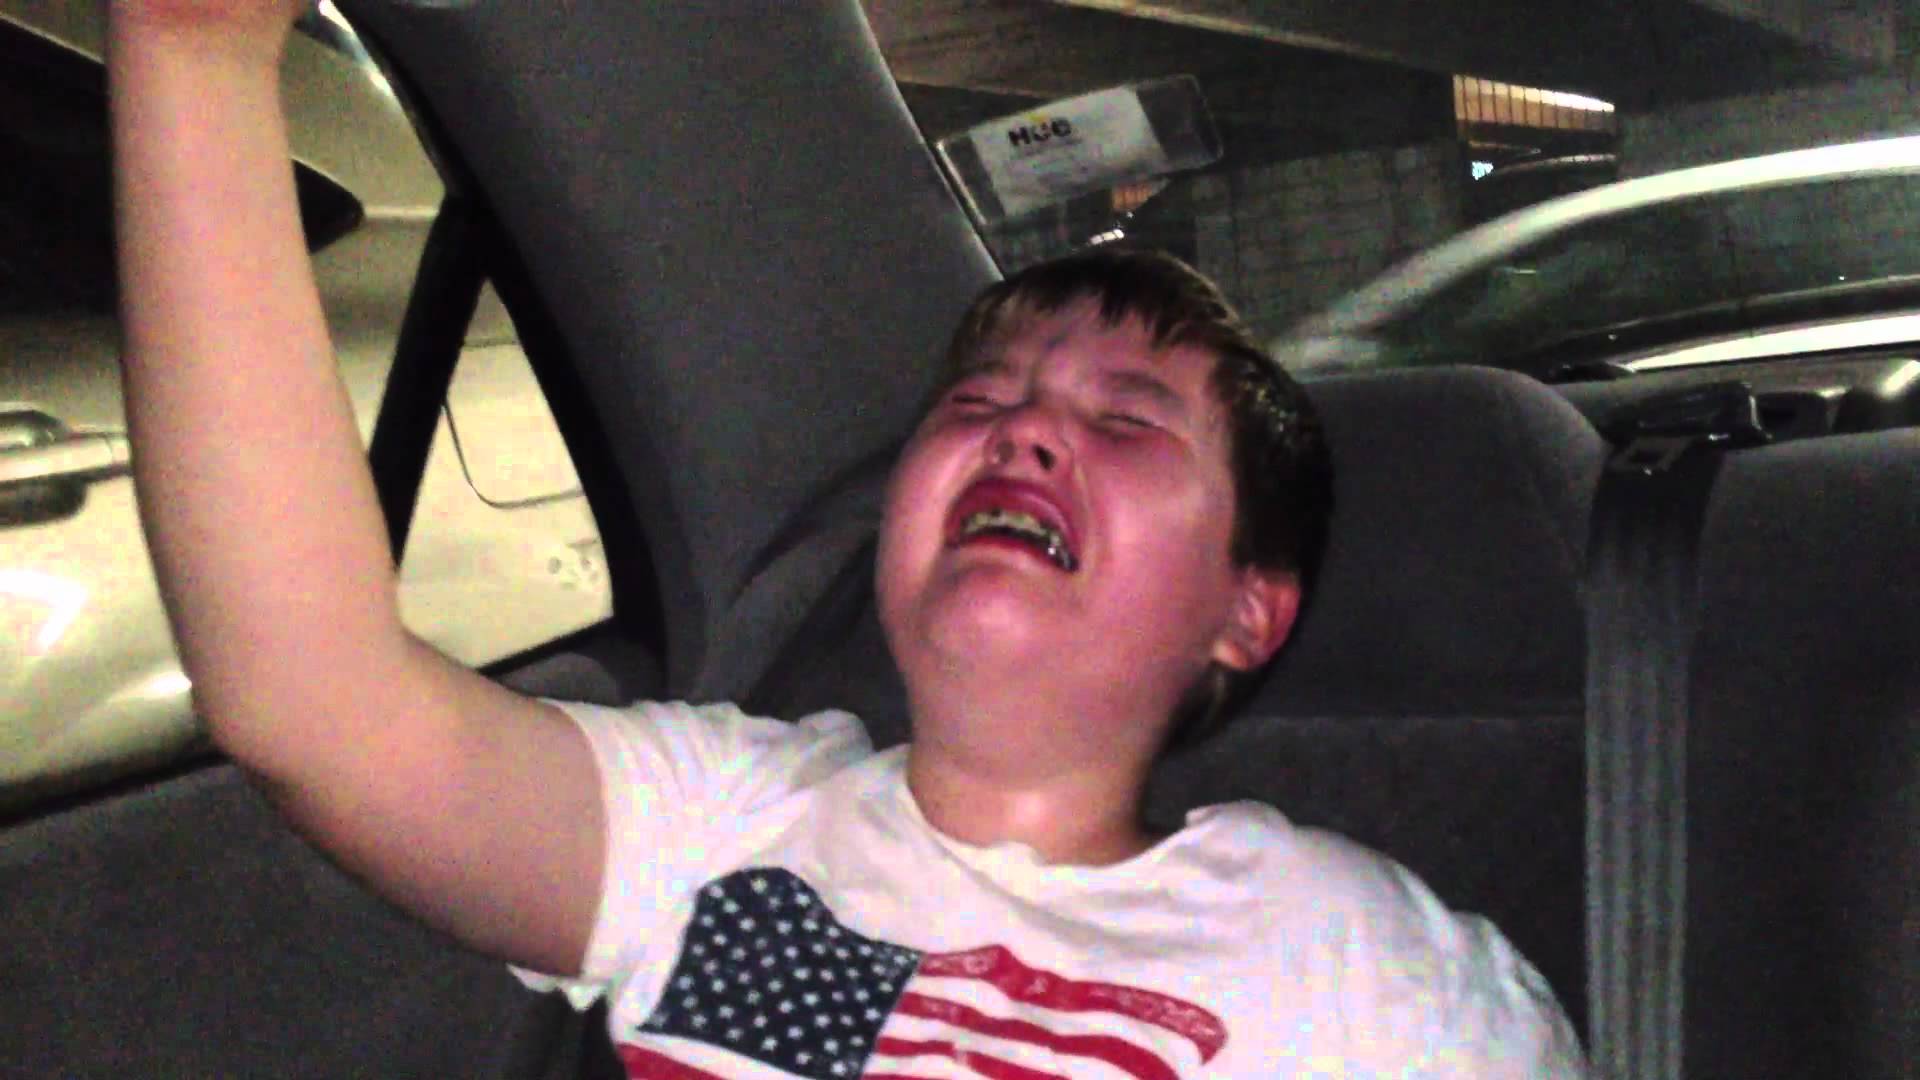 OMG, so sad it's funny: Little boys crying at the end of a movie 